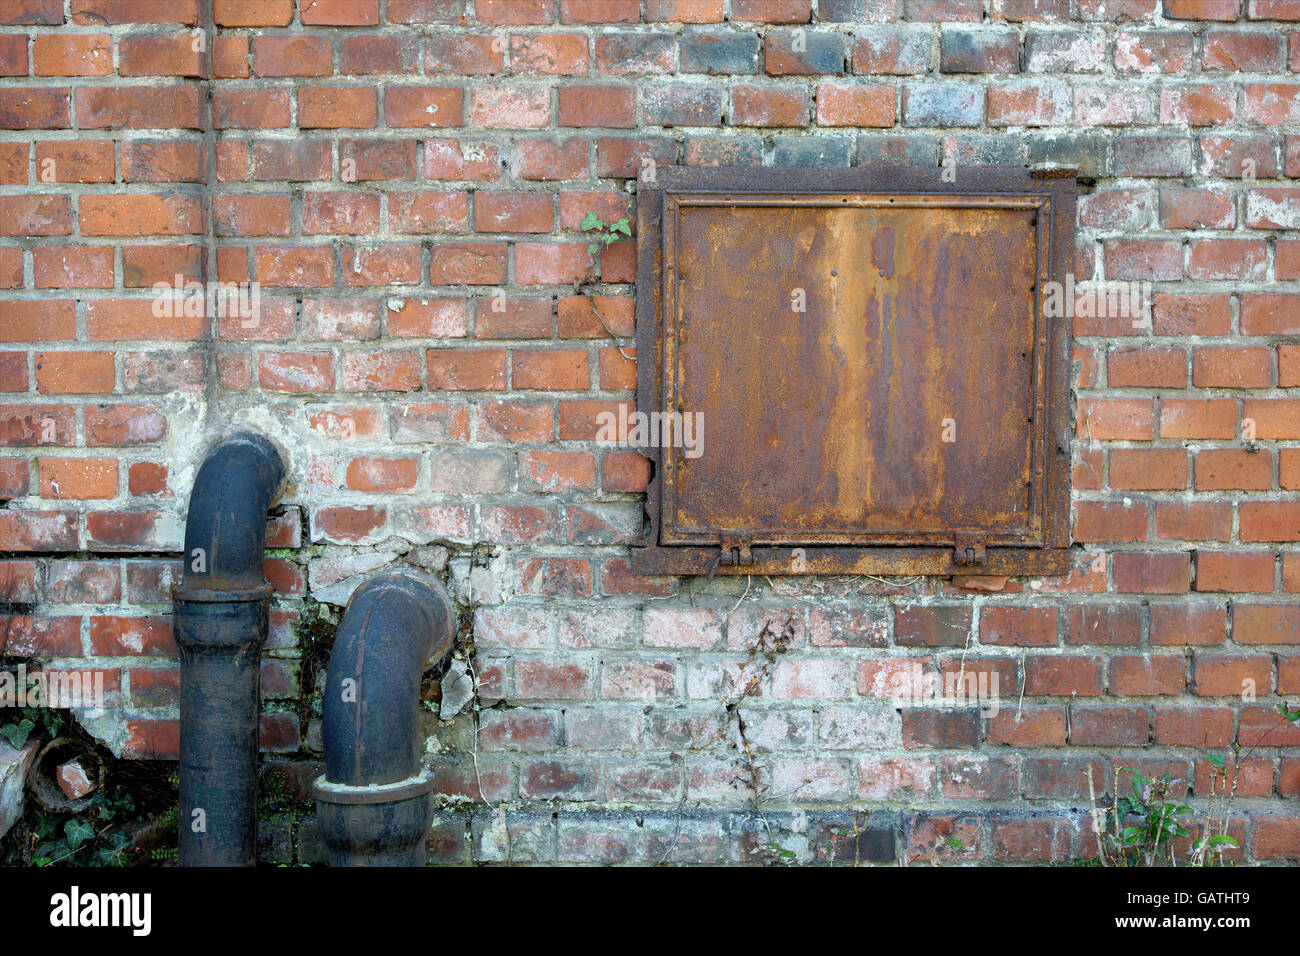 Brick wall of a old house with drainage pipes and one iron window Stock Photo